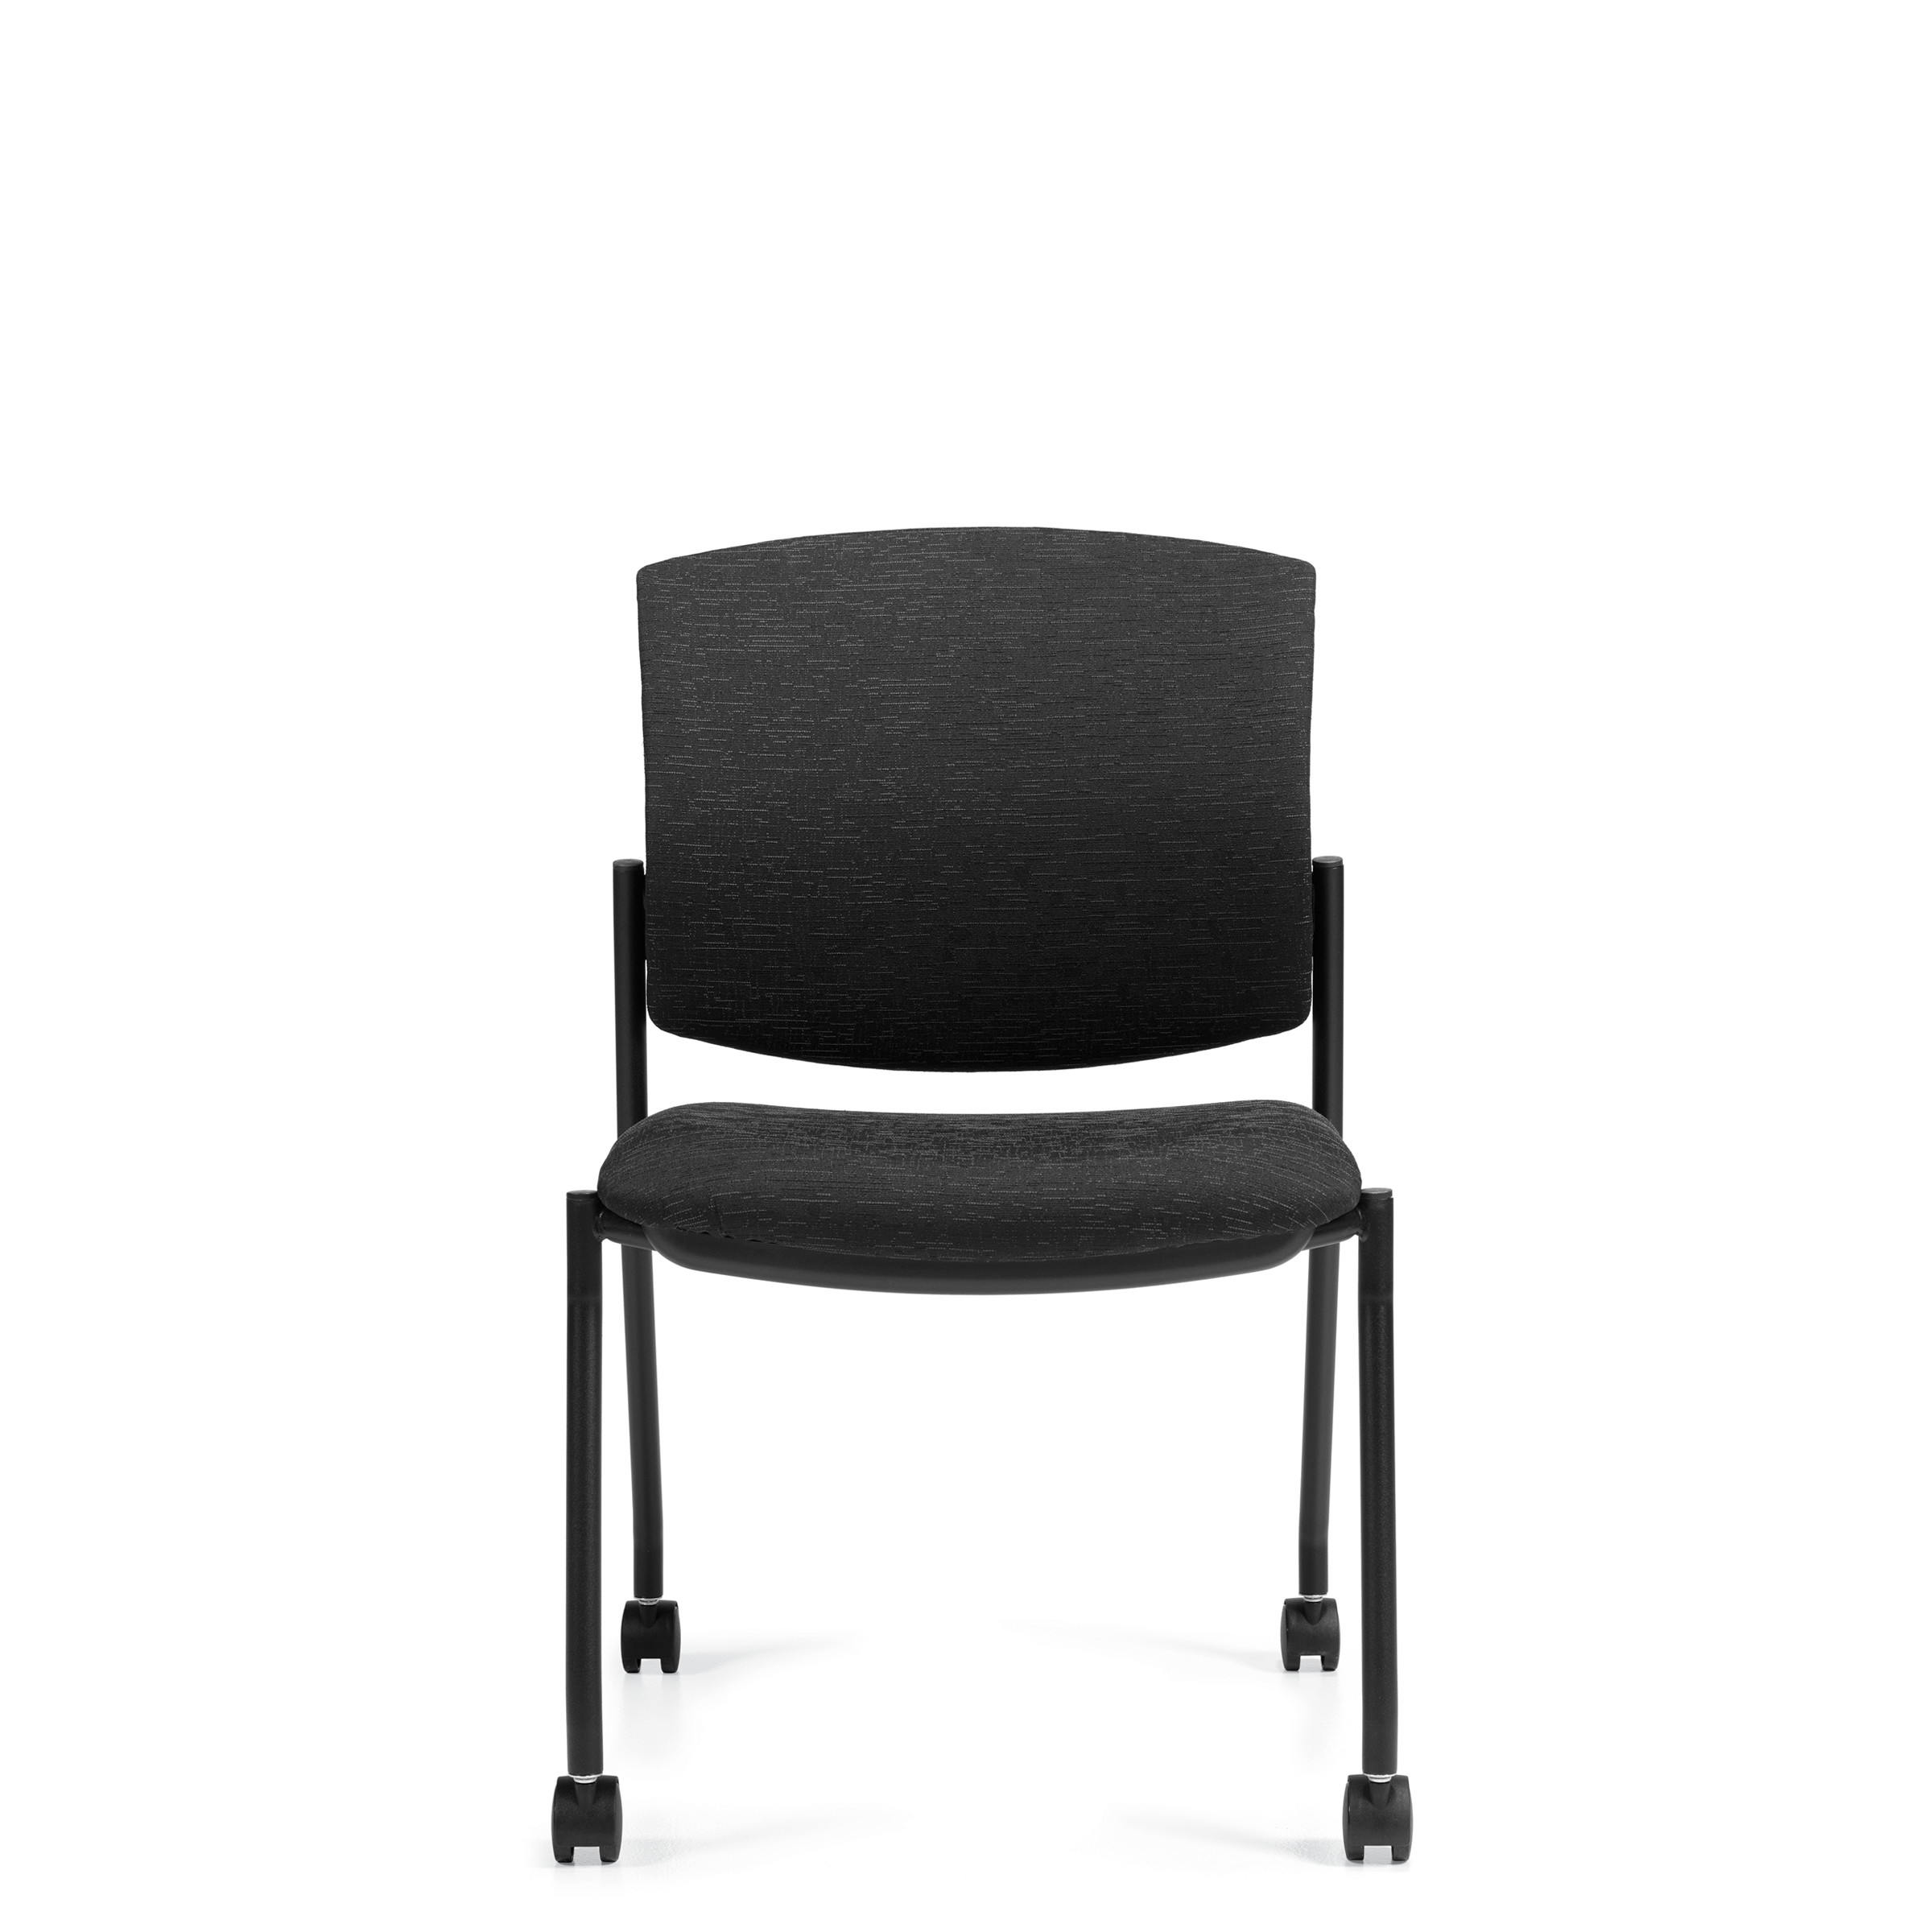 Ibex | Upholstered Seat & Back Armless Guest Chair on Casters